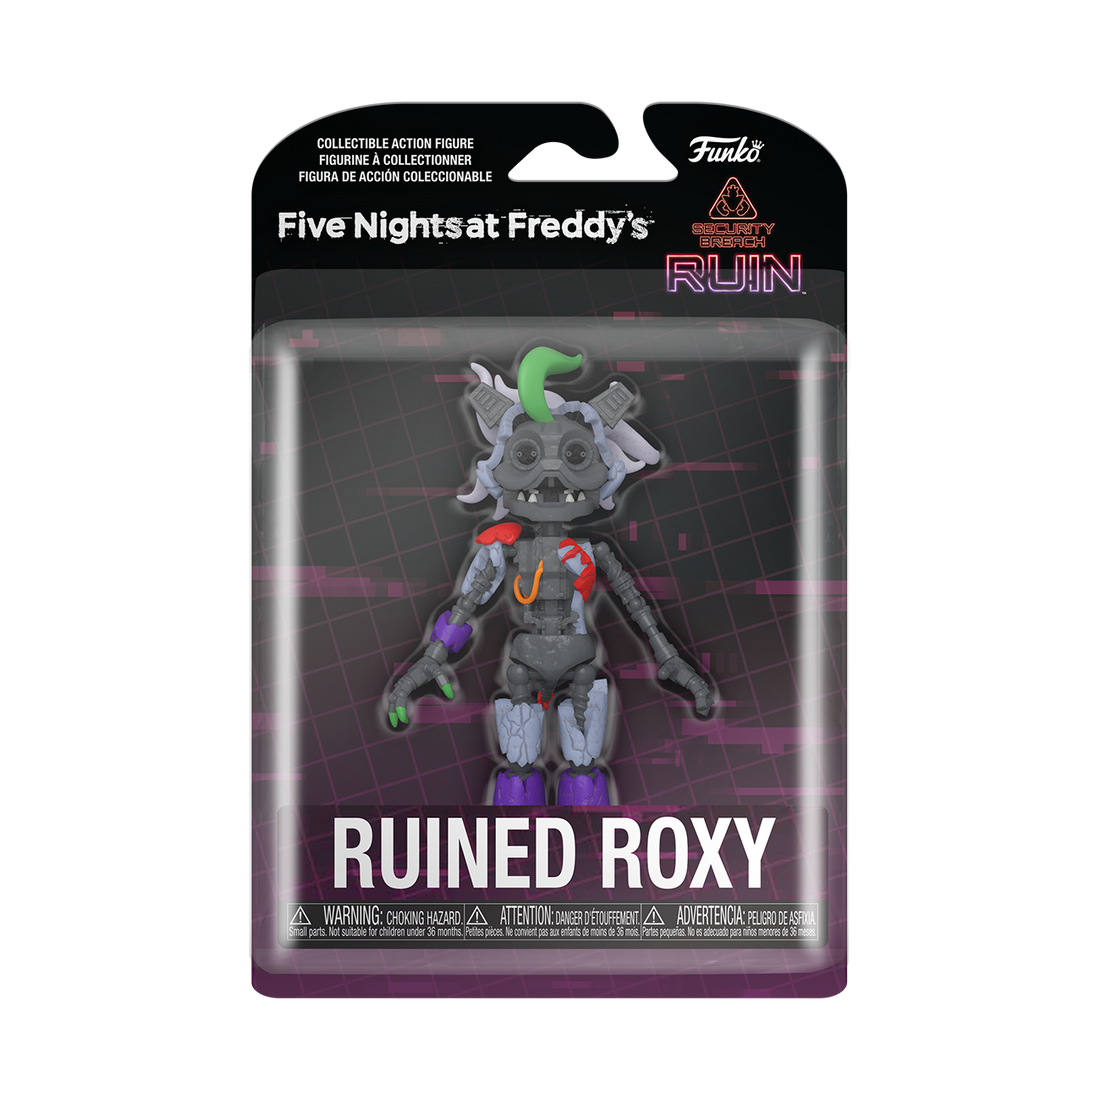 Five Nights at Freddy's Ruined Roxy Action Figure Funko